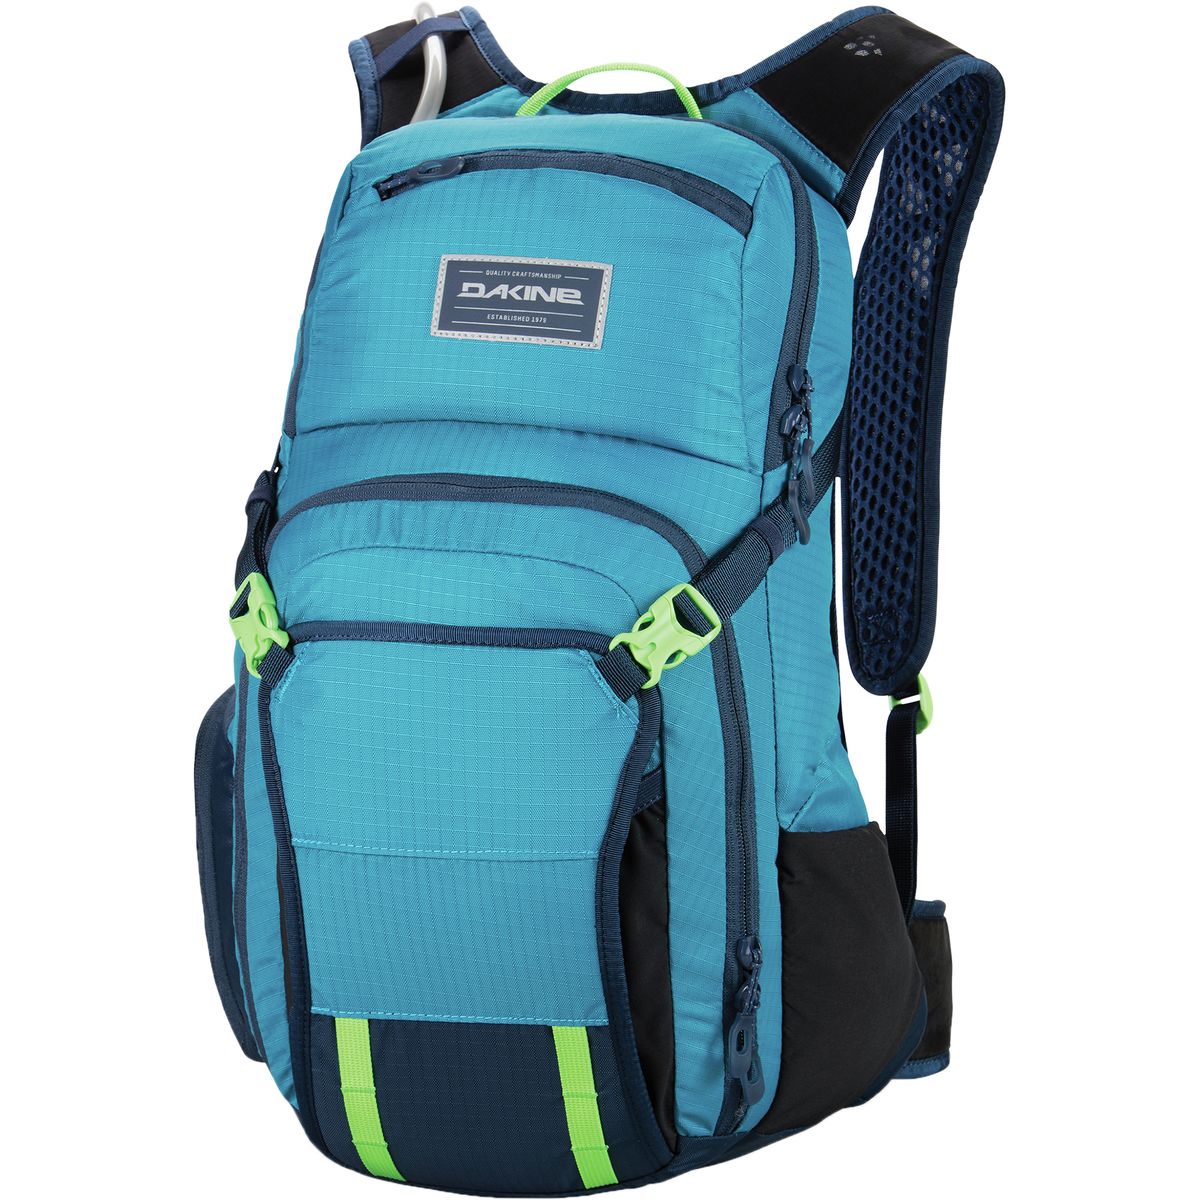 Xan Marshland reviews the Dakine Drafter 14L for Blister Review